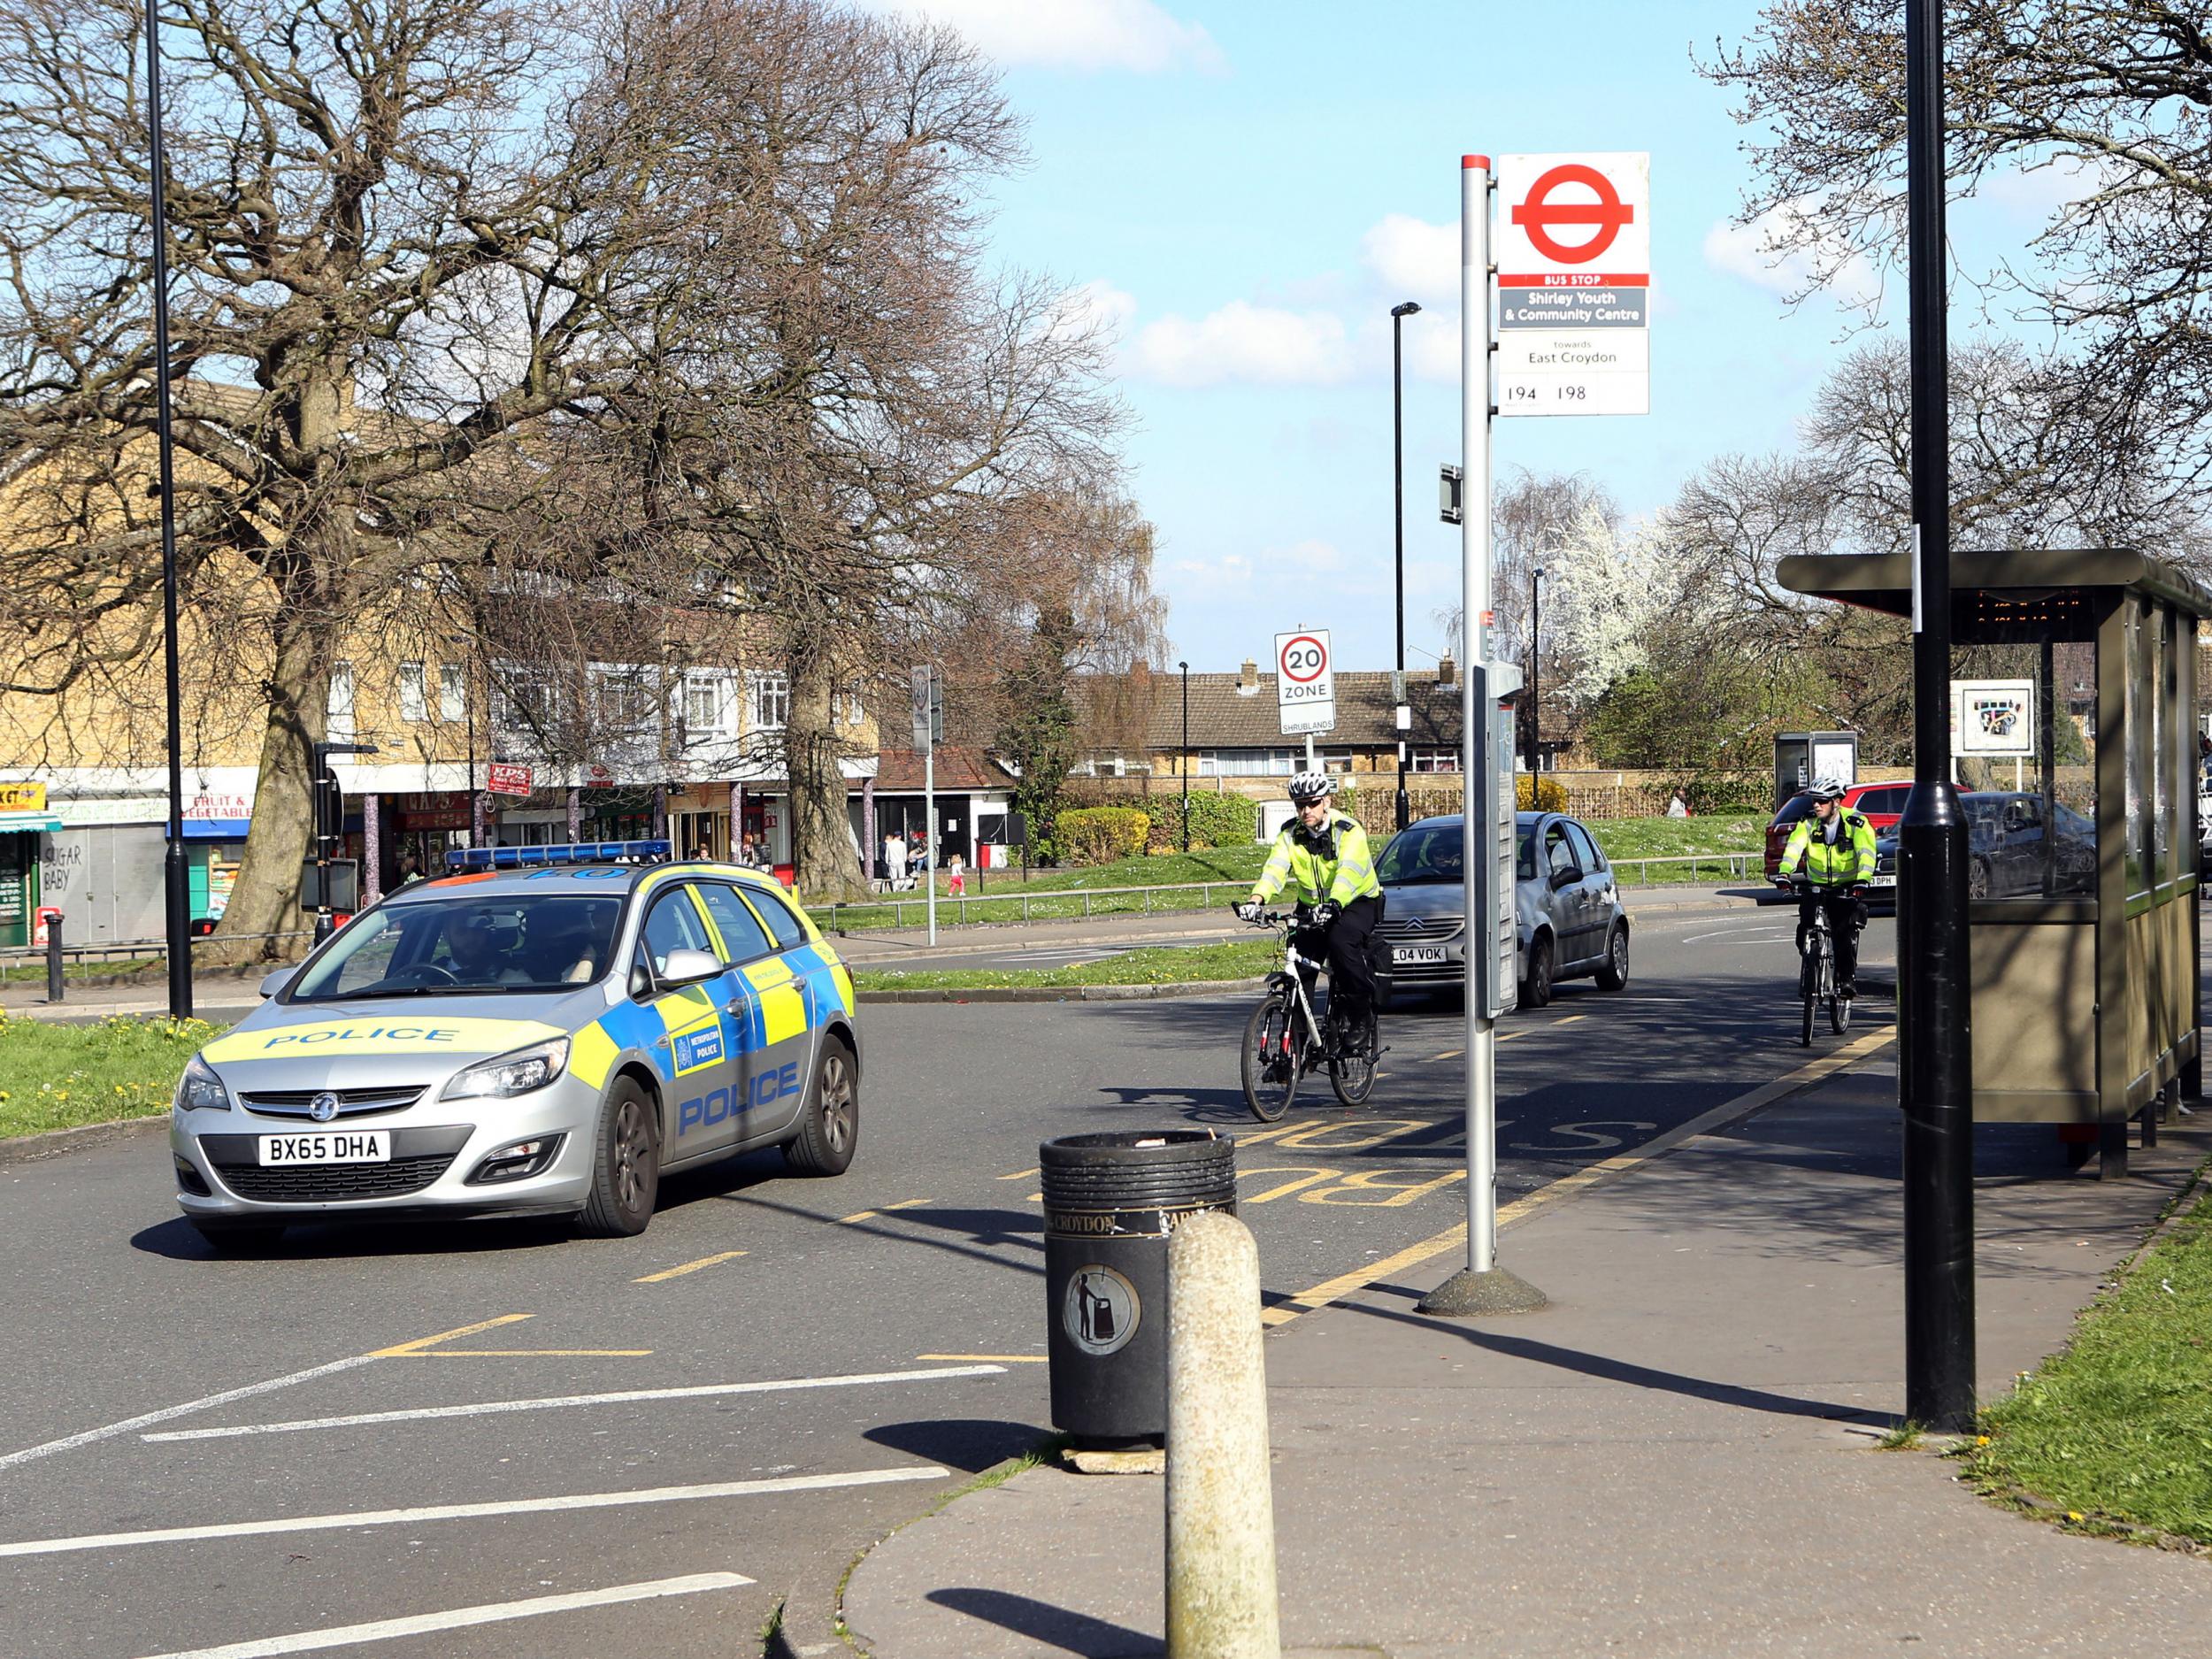 Police officers pass the bus stop in Croydon, south London, where a teenage asylum seeker was victim of a suspected hate attack